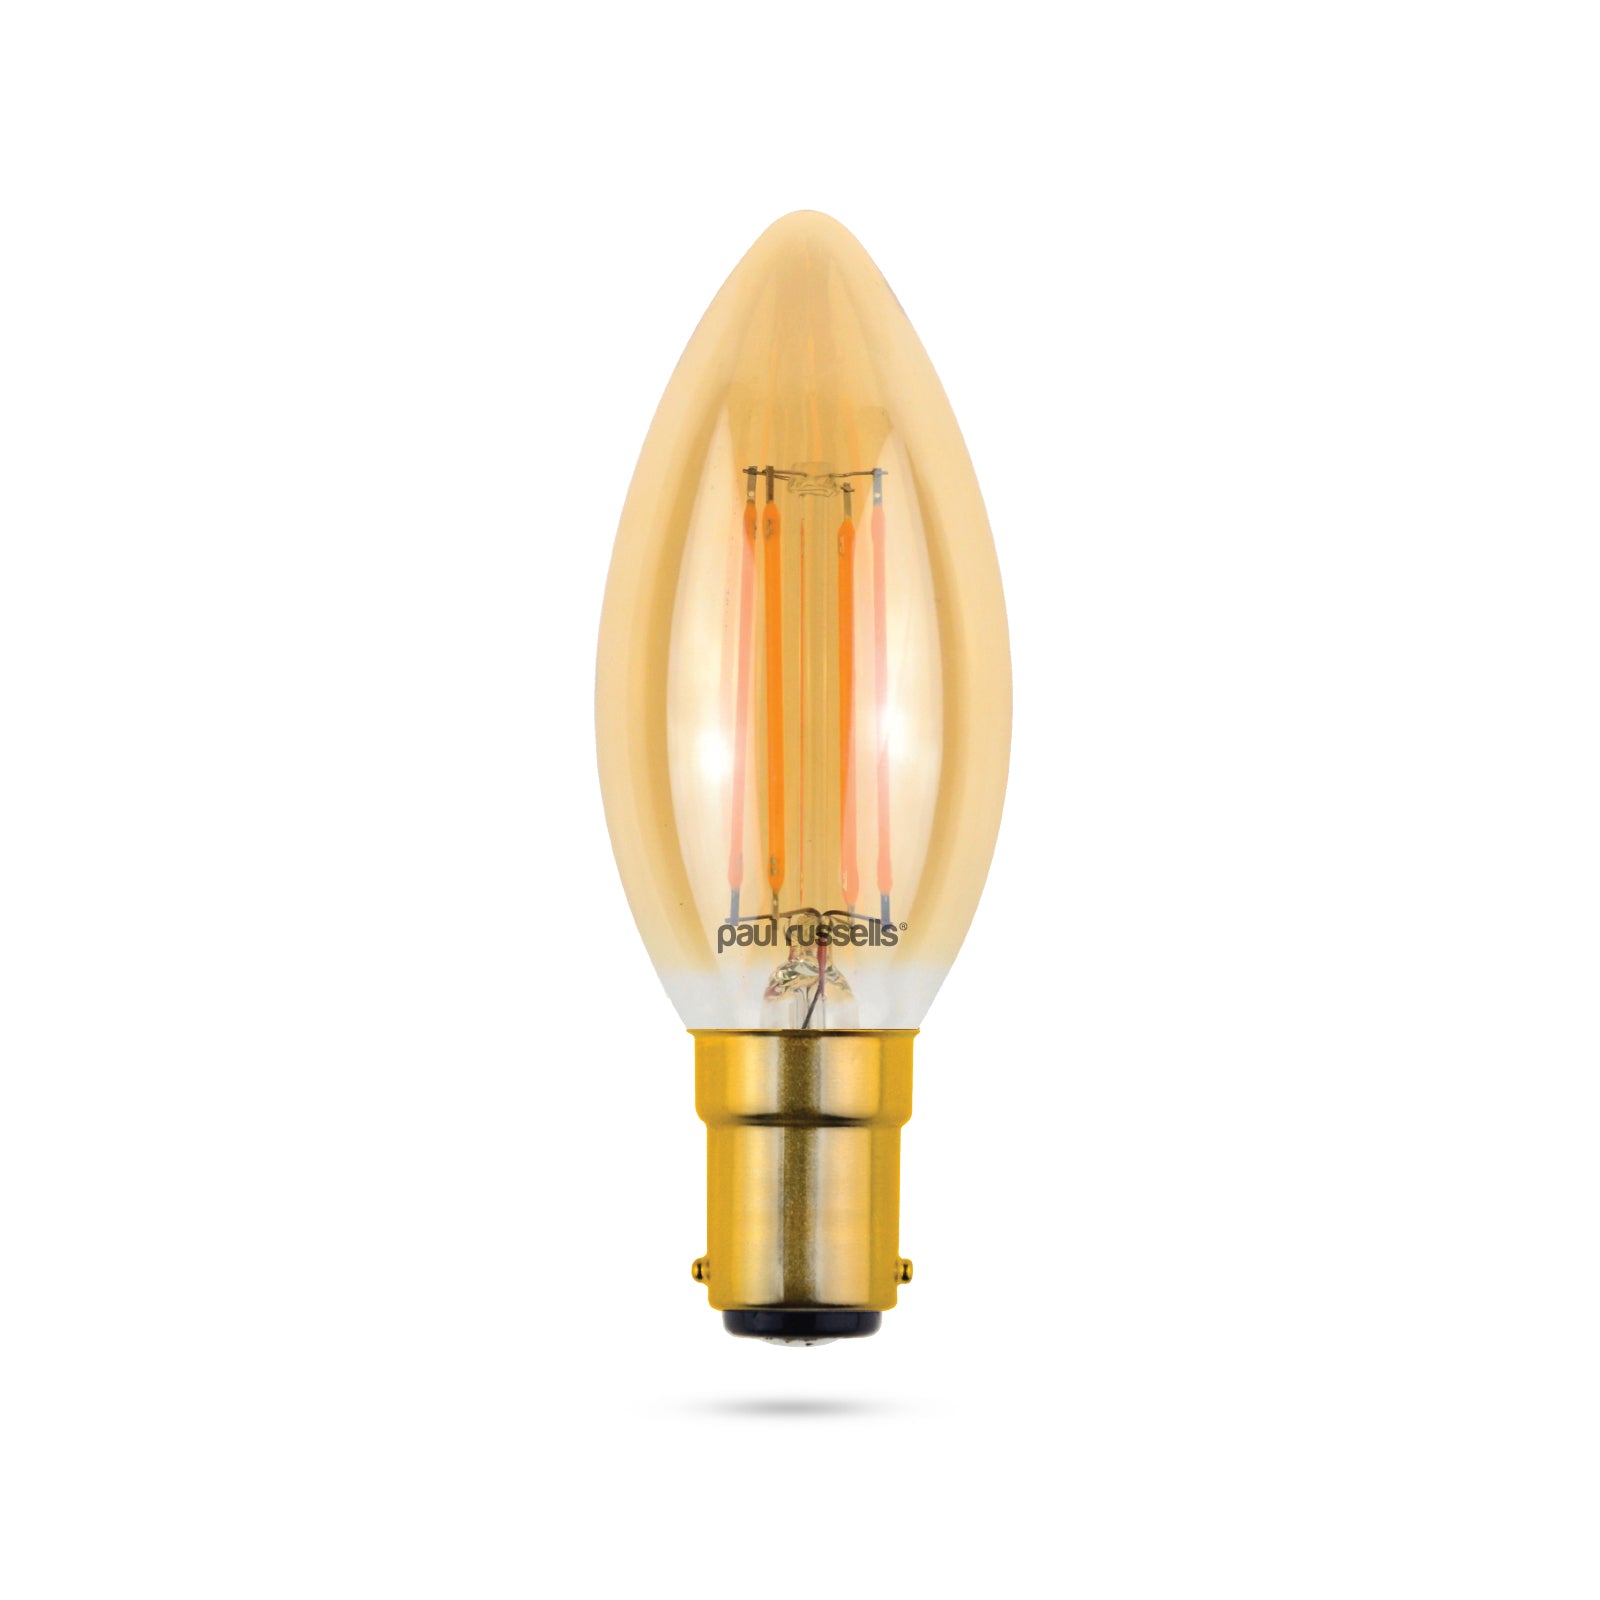 LED Dimmable Filament Candle 4.5W (40w), SBC/B15, 423 Lumens, Extra Warm White(2200K), 240V